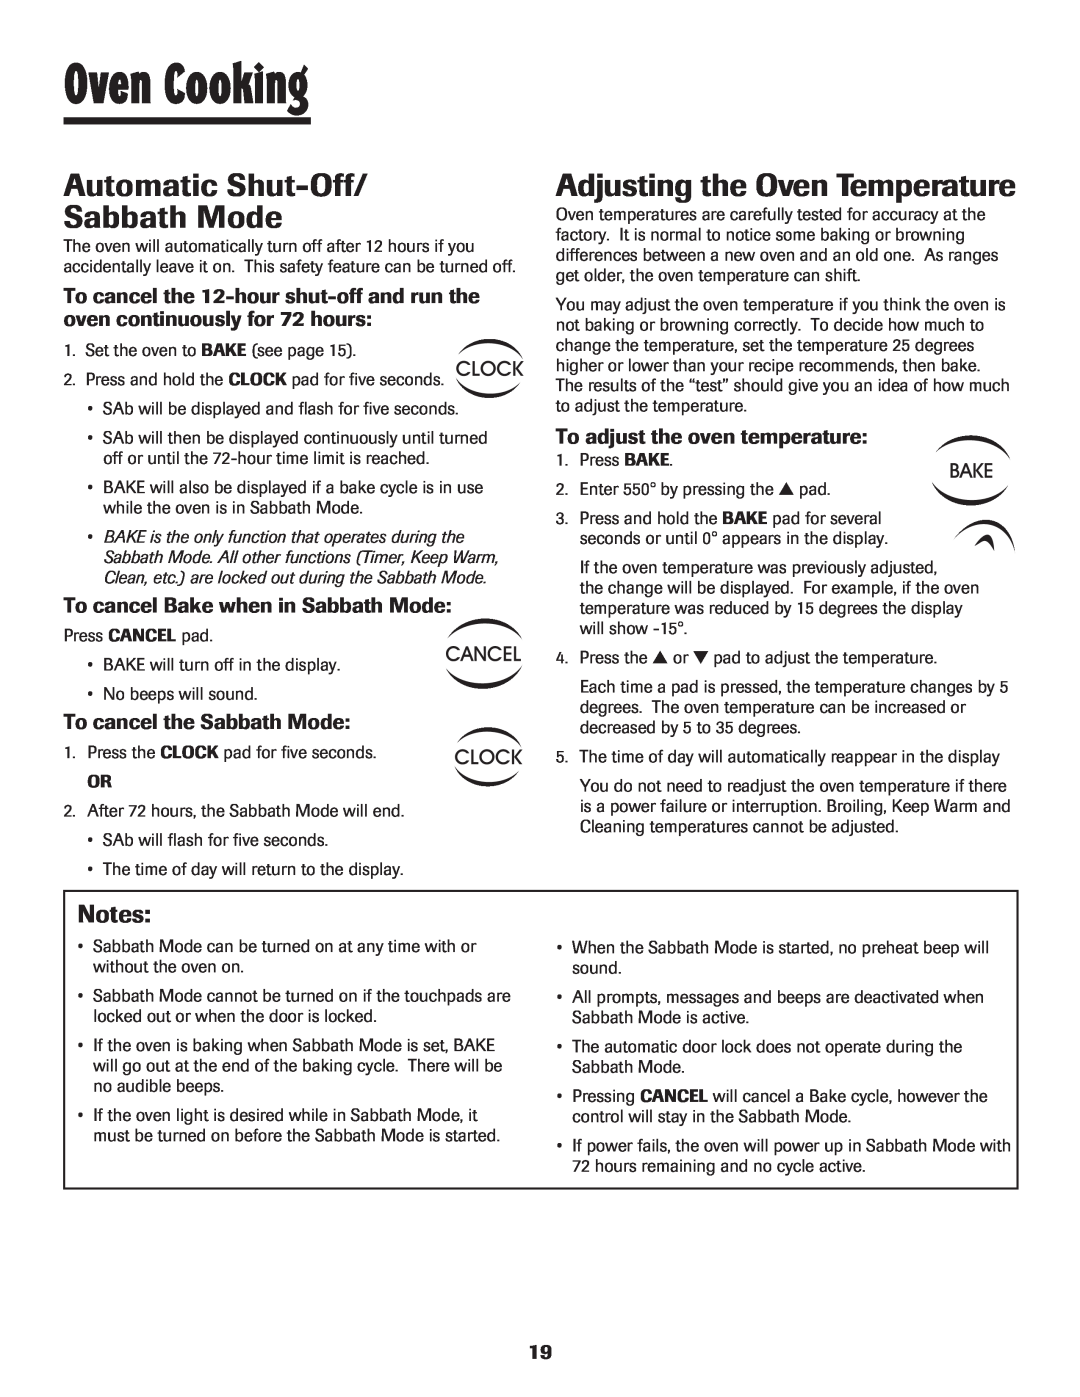 Maytag 500 Automatic Shut-Off Sabbath Mode, Adjusting the Oven Temperature, To cancel Bake when in Sabbath Mode, Notes 